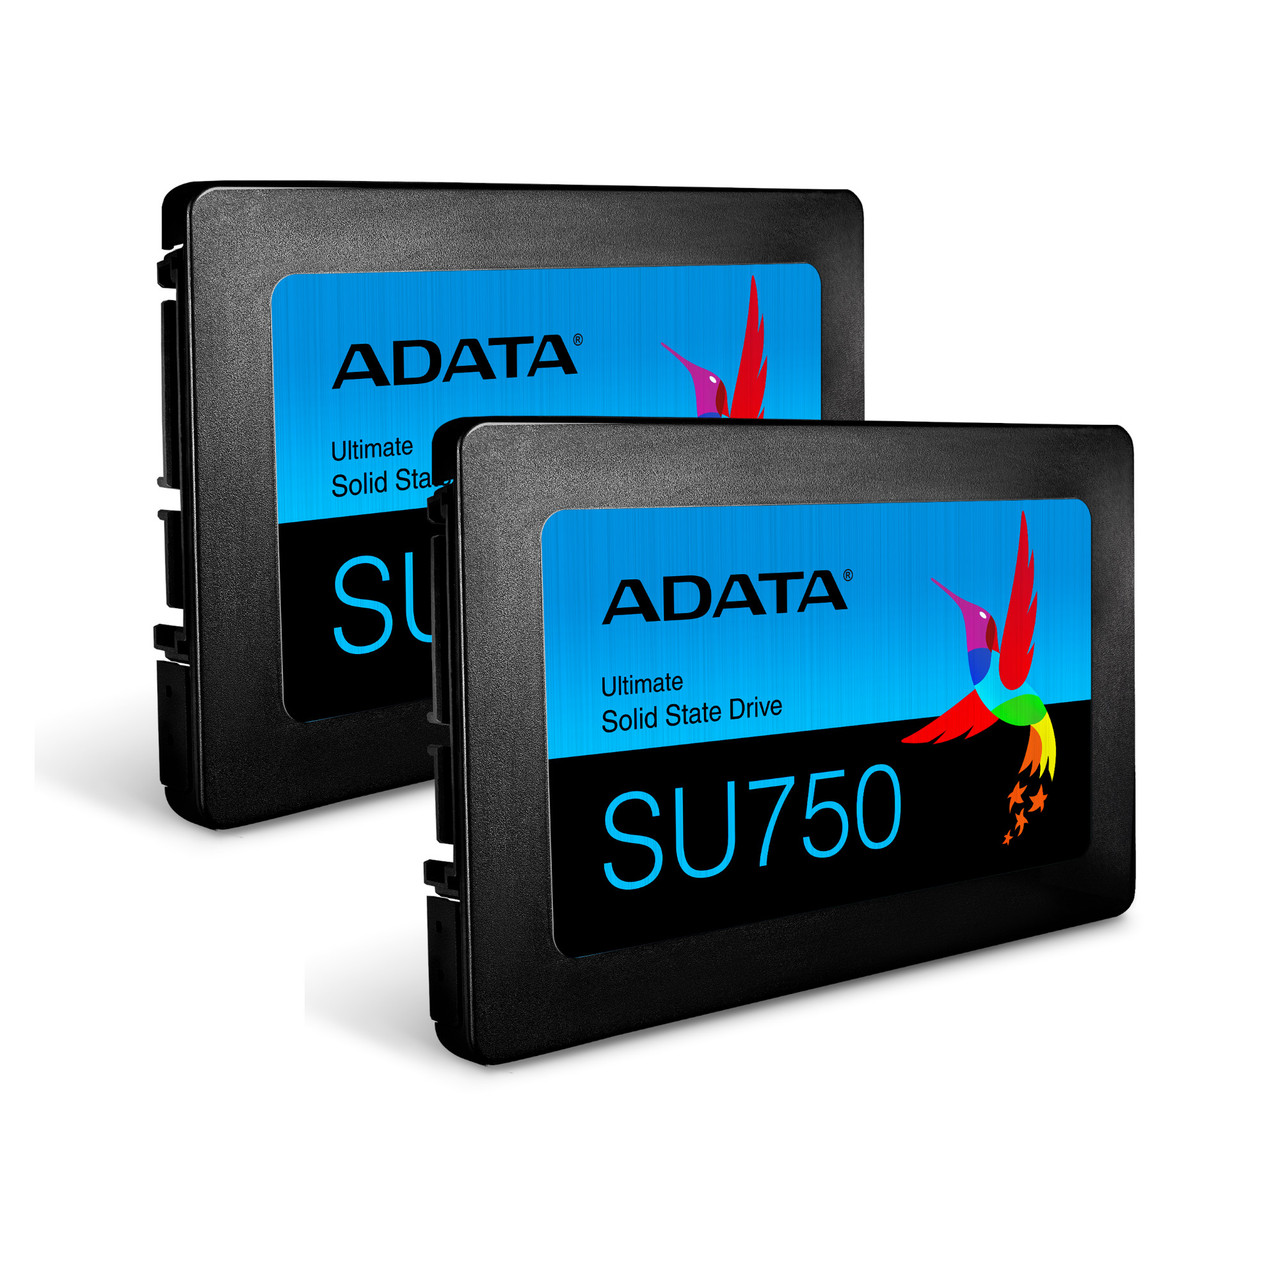 ADATA Ultimate Series SU750 256GB Each / QTY 2 - SATA III - 2.5" Internal Solid State | Black/Green SSD | Up to 550MBps | 2 Pack Boot Drives Savings Bundle - ADATA